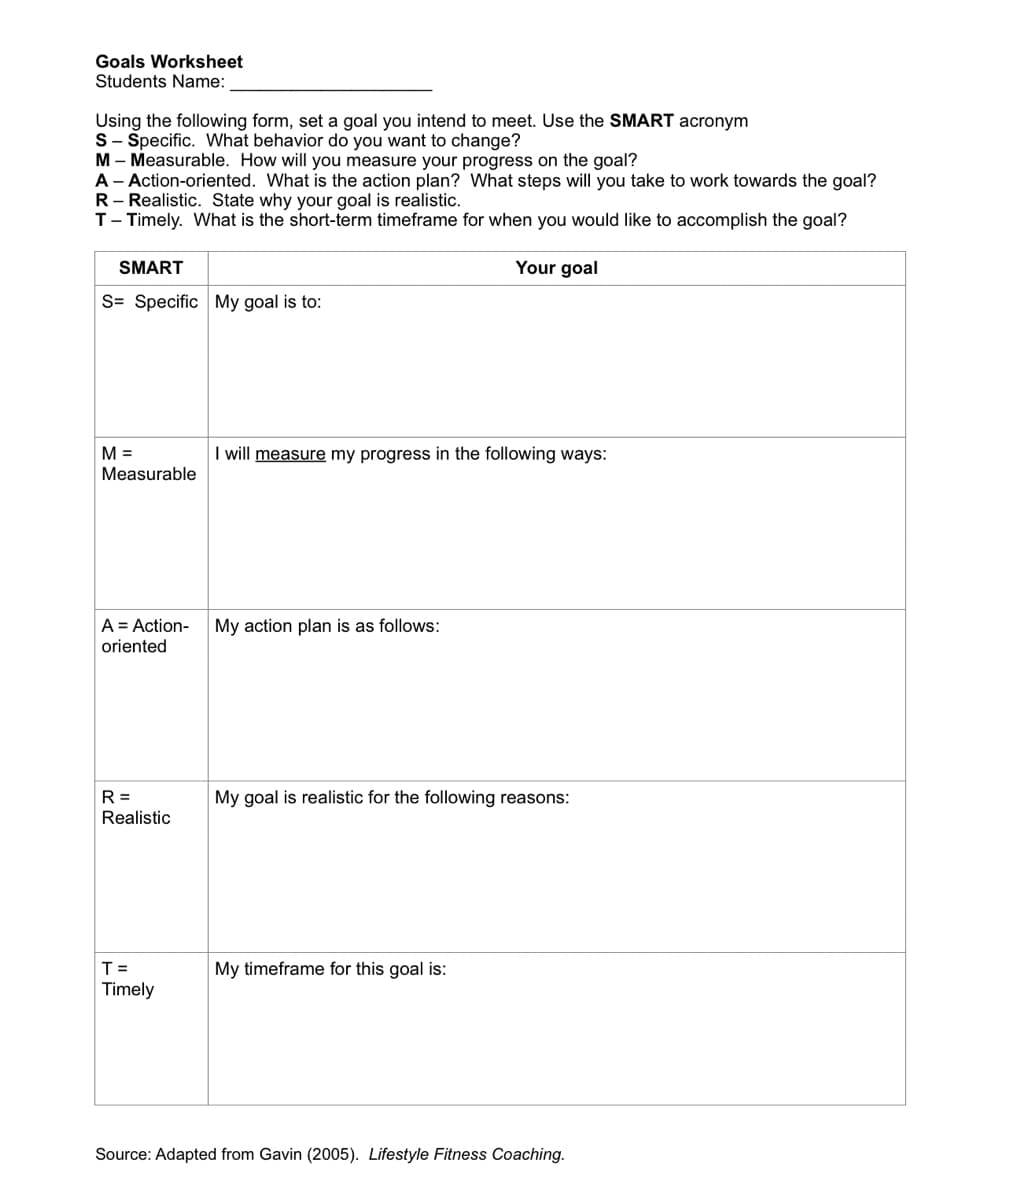 Goals Worksheet
Students Name:
Using the following form, set a goal you intend to meet. Use the SMART acronym
S Specific. What behavior do you want to change?
M-Measurable. How will you measure your progress on the goal?
A-Action-oriented. What is the action plan? What steps will you take to work towards the goal?
R-Realistic. State why your goal is realistic.
T-Timely. What is the short-term timeframe for when you would like to accomplish the goal?
SMART
S= Specific My goal is to:
Your goal
M =
Measurable
I will measure my progress in the following ways:
A = Action-
oriented
My action plan is as follows:
R =
My goal is realistic for the following reasons:
Realistic
T =
Timely
My timeframe for this goal is:
Source: Adapted from Gavin (2005). Lifestyle Fitness Coaching.